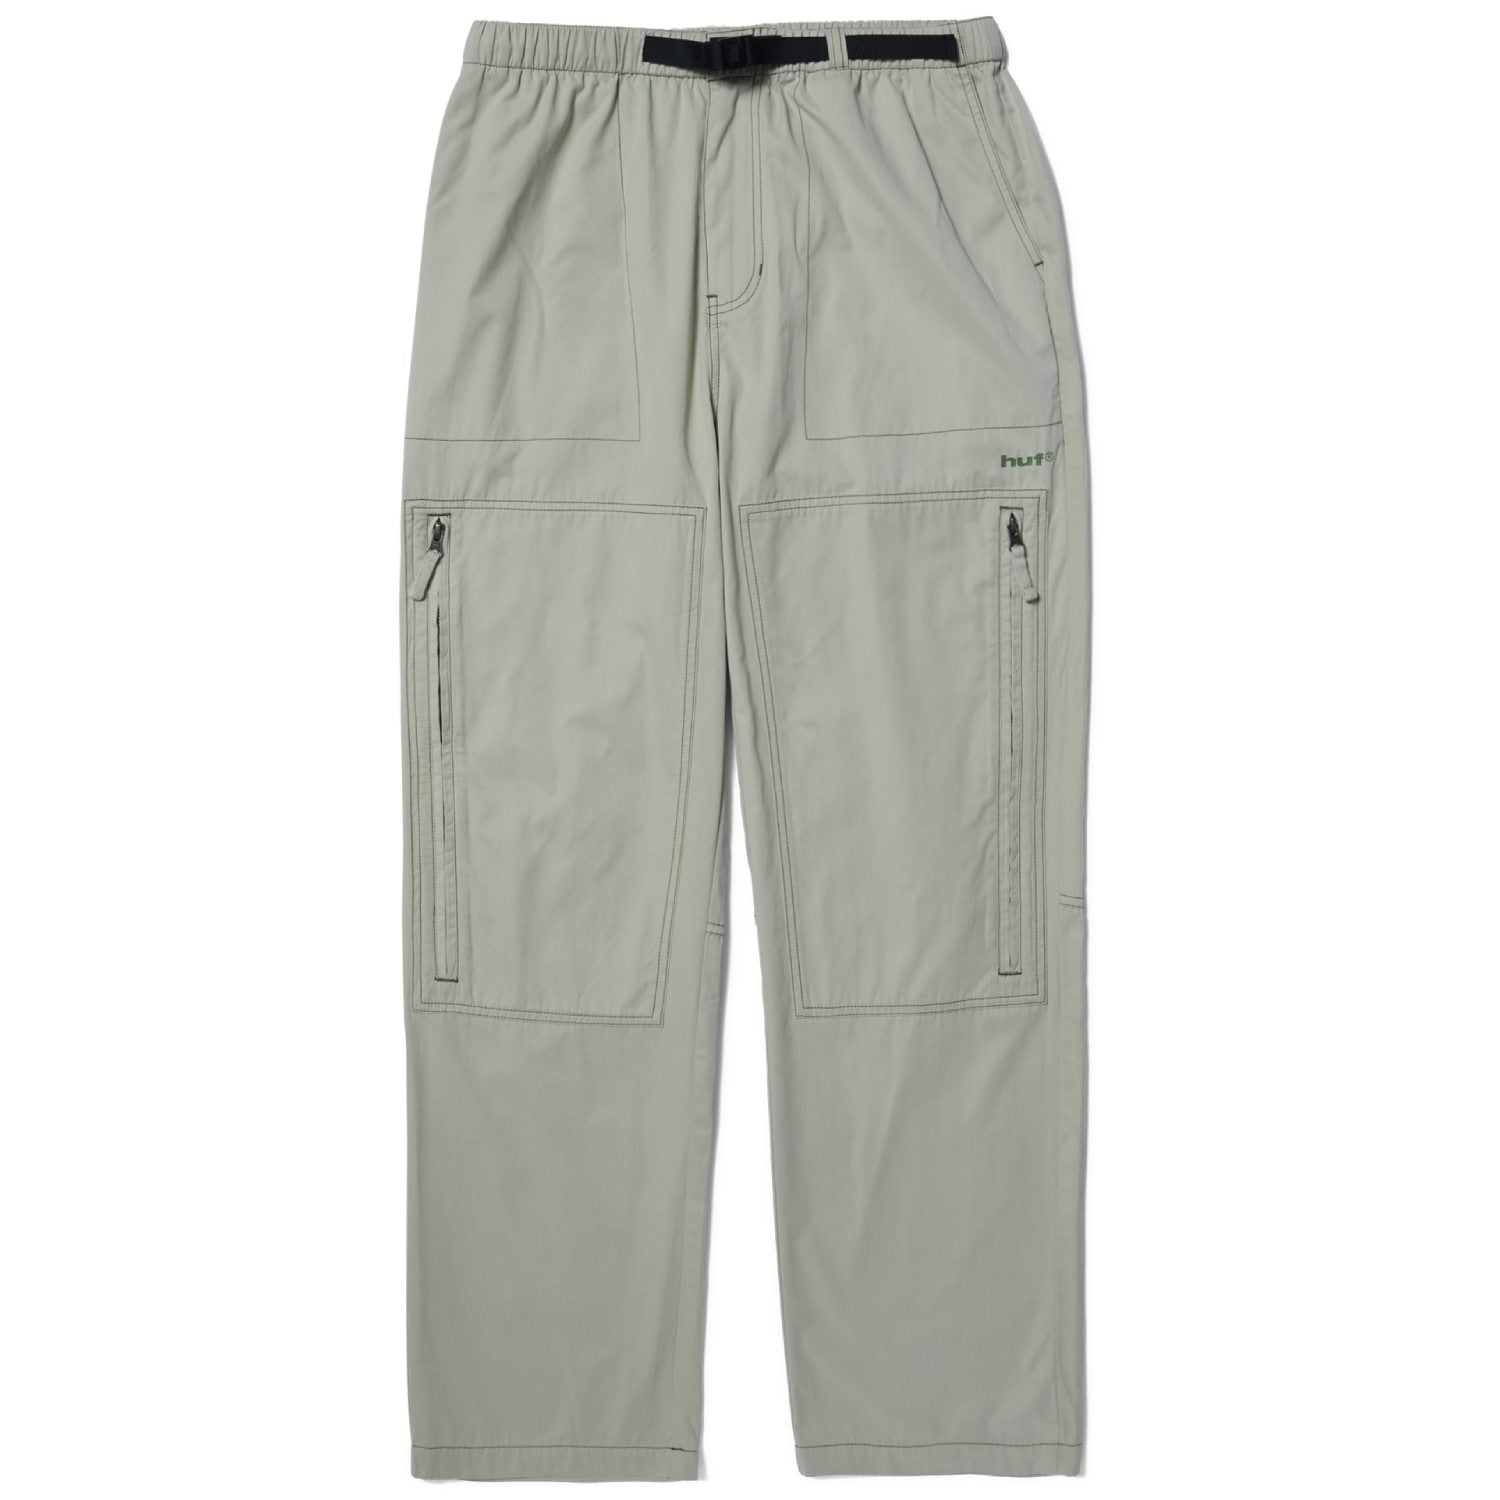 HUF - Loma Tech Pants - Biscuit